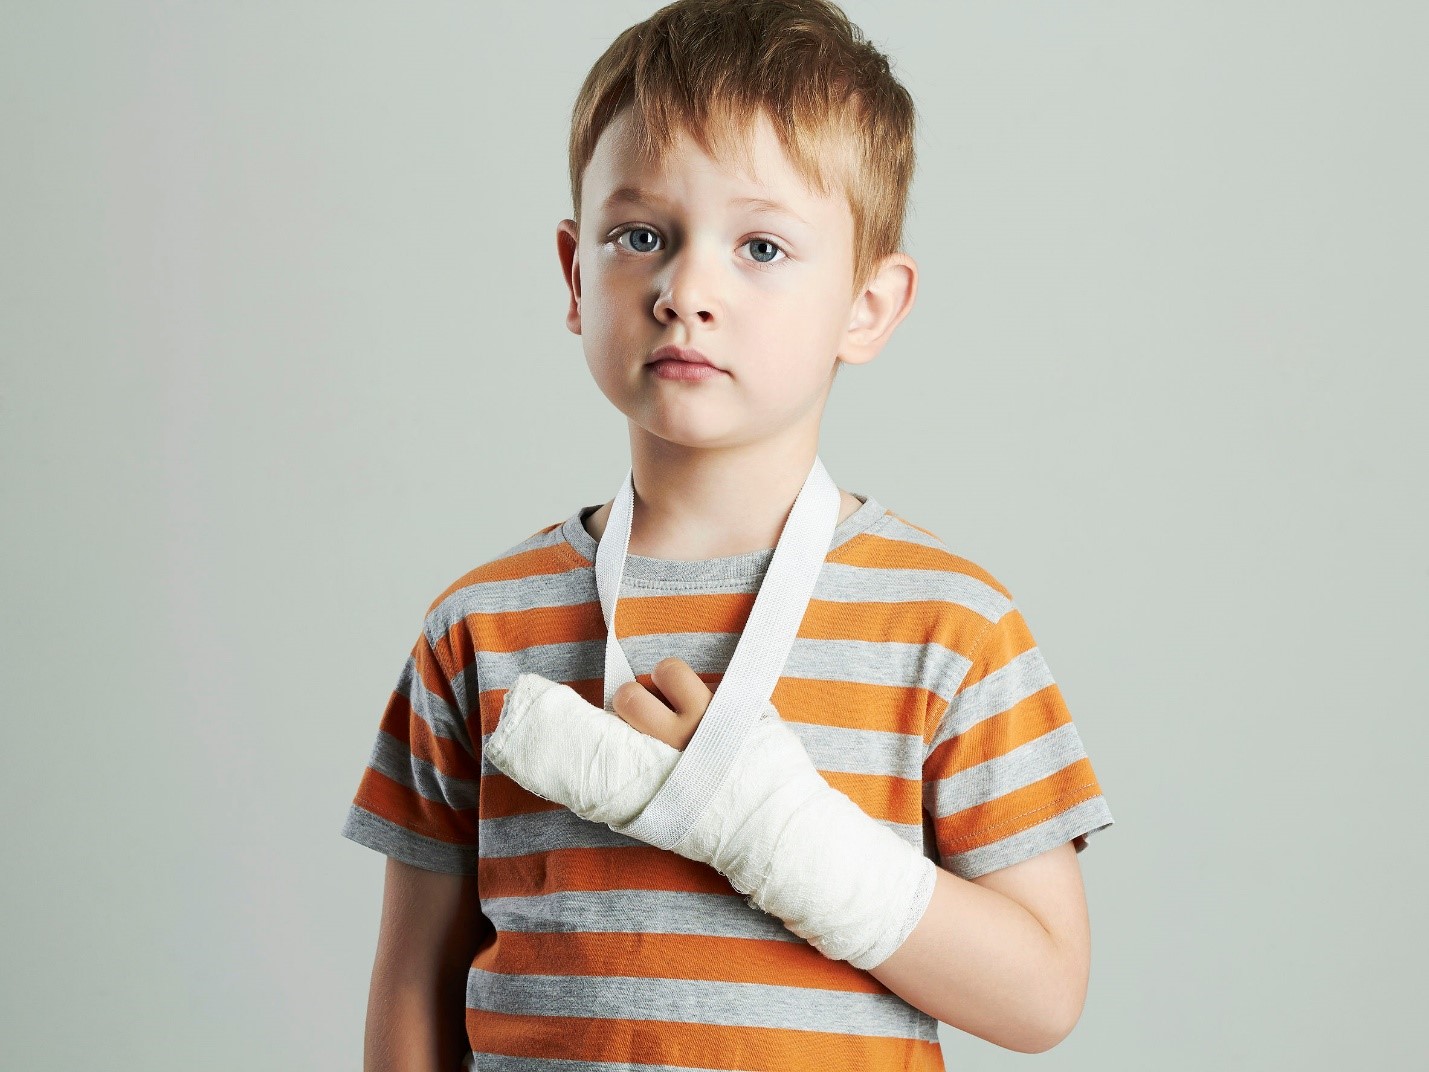 Top Child Accidents - What Florida Parents Should Really Worry About